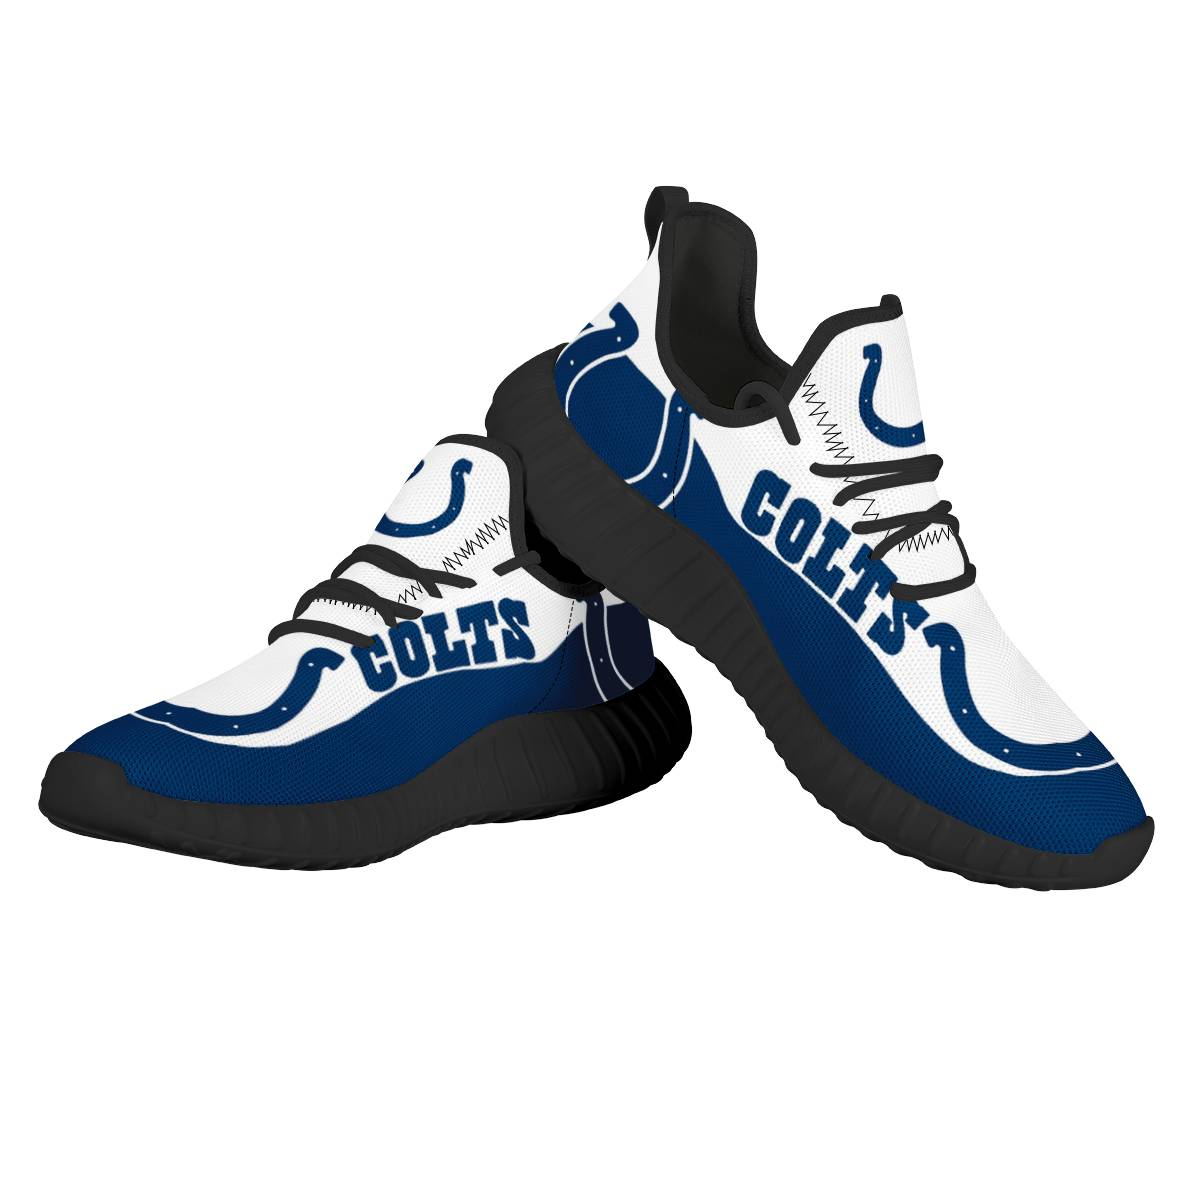 Women's NFL Indianapolis Colts Mesh Knit Sneakers/Shoes 003